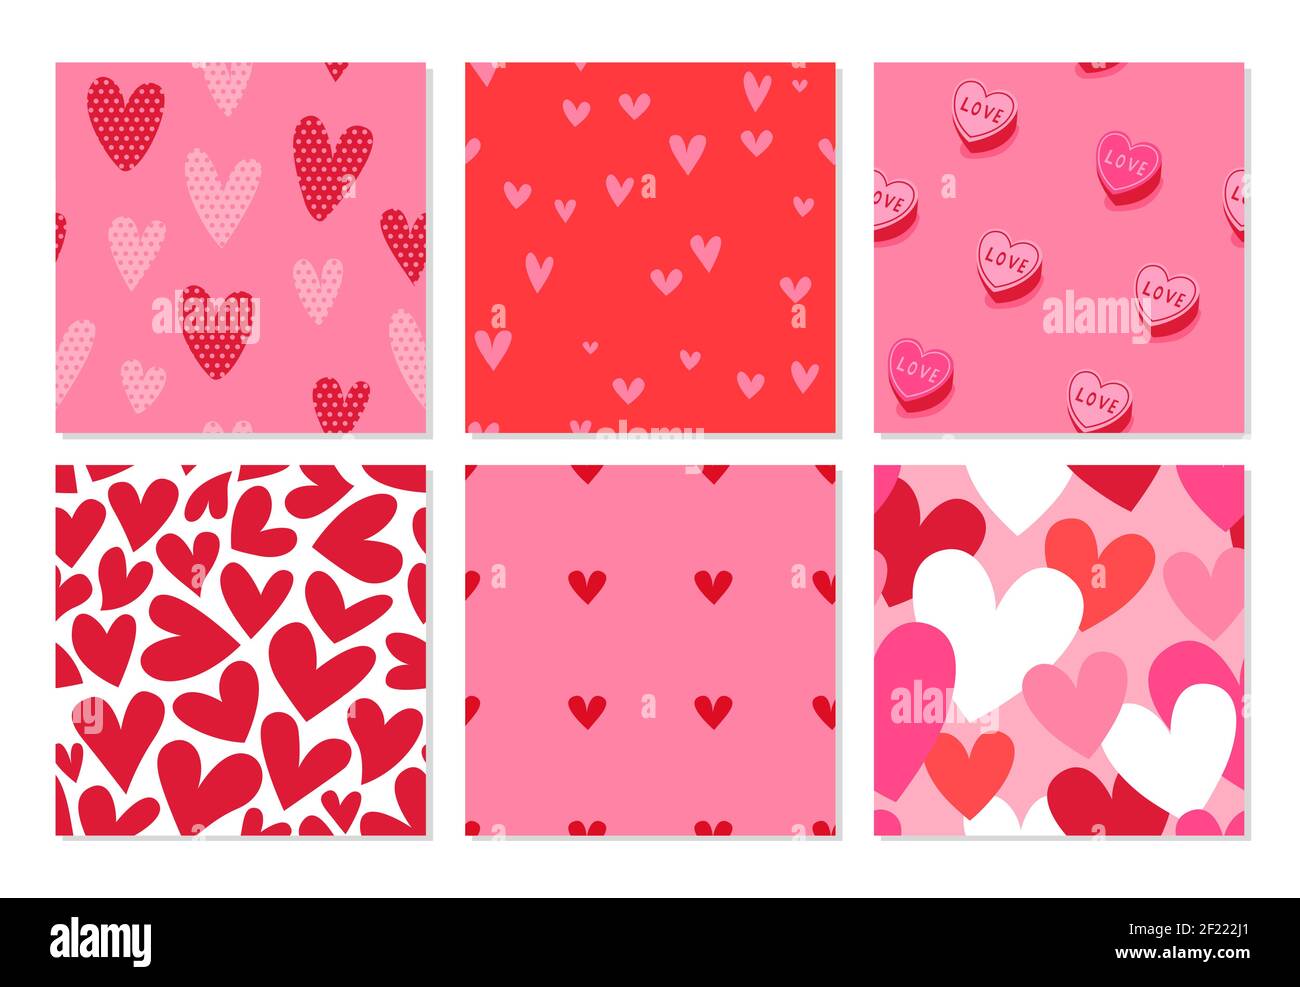 Pink valentine's day heart shape cartoon seamless pattern set. Cute romantic doodle background collection for holiday print or love concept. Stock Vector